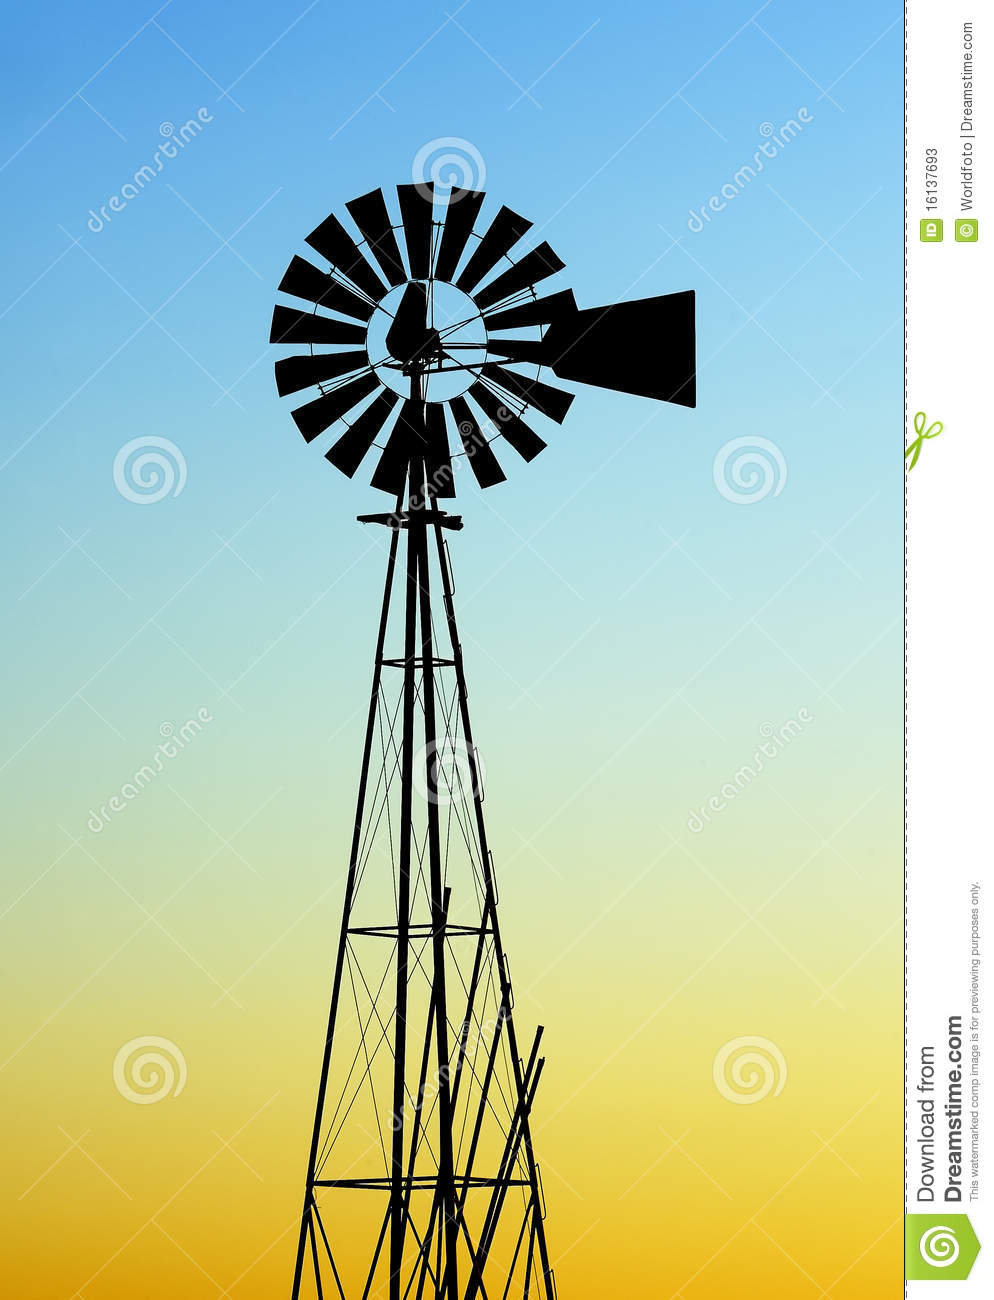 Old Style Windmill Silhouette Stock Photos   Image  16137693